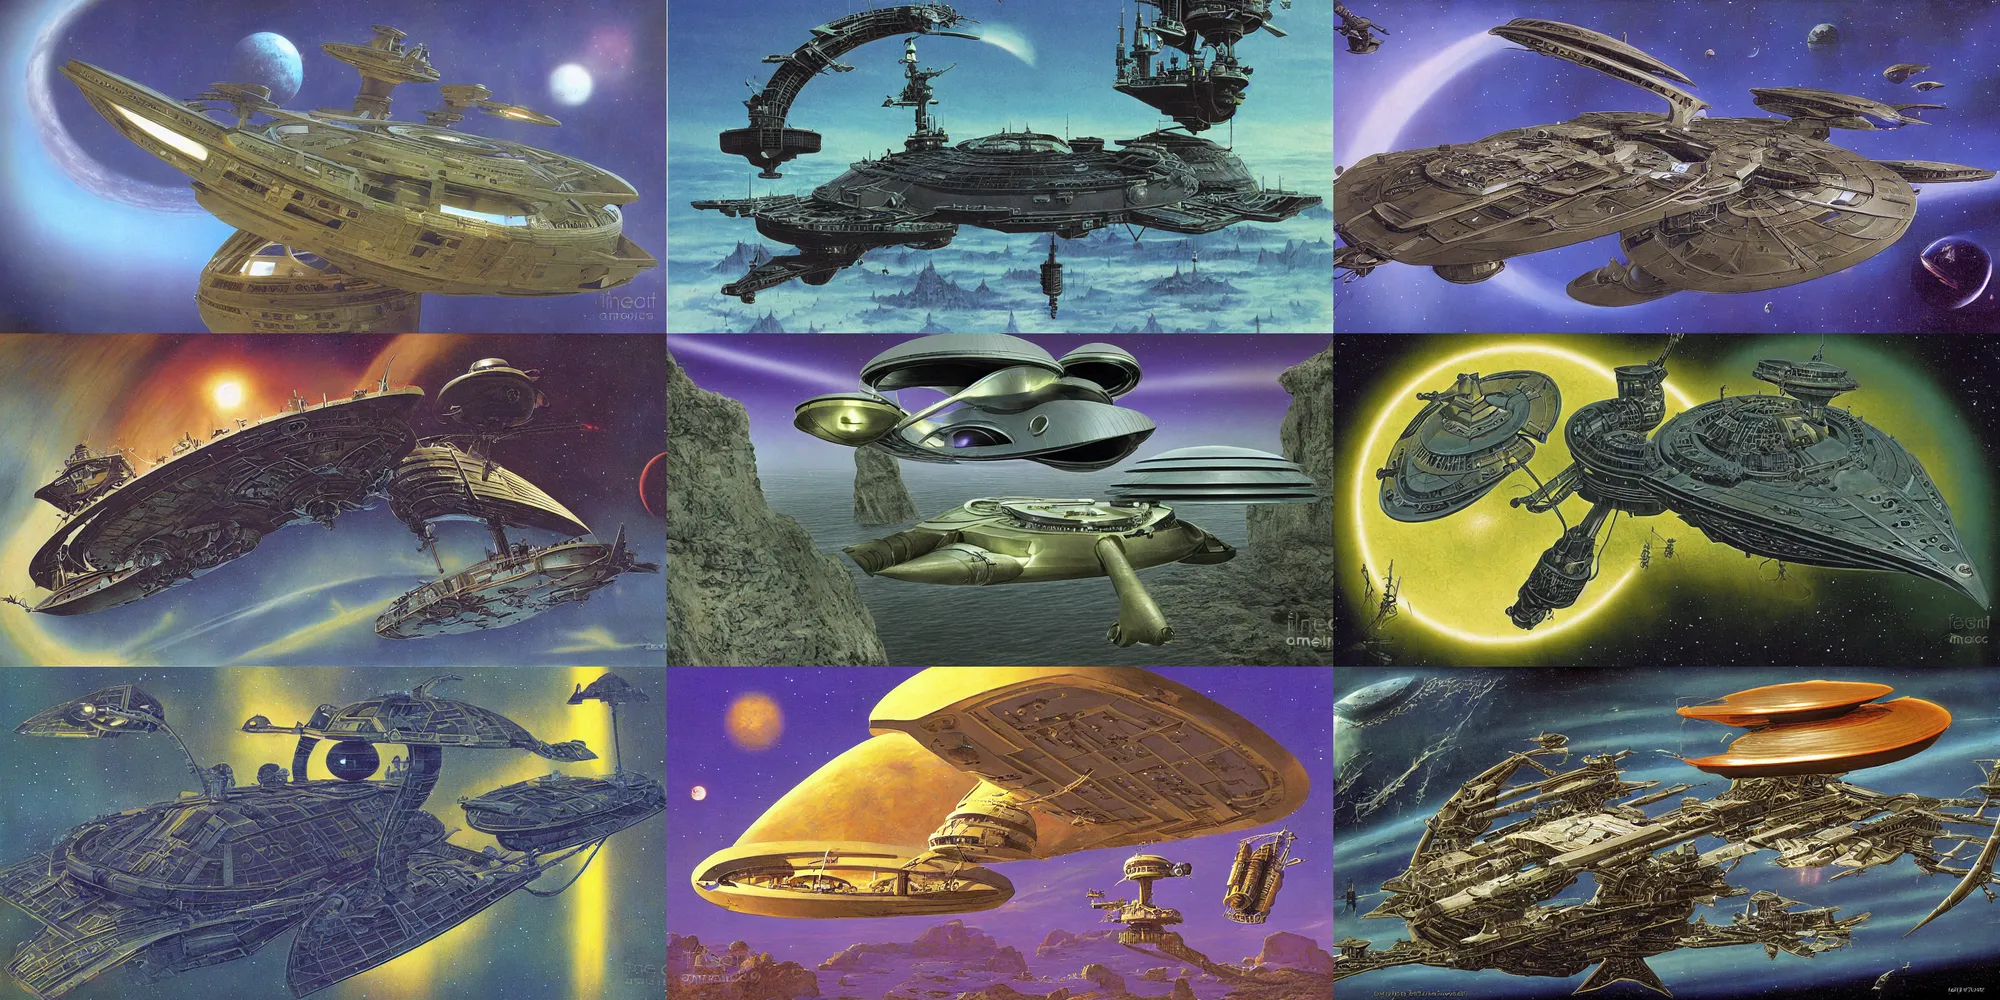 Prompt: photograph alien scout ship by darrell k. sweet